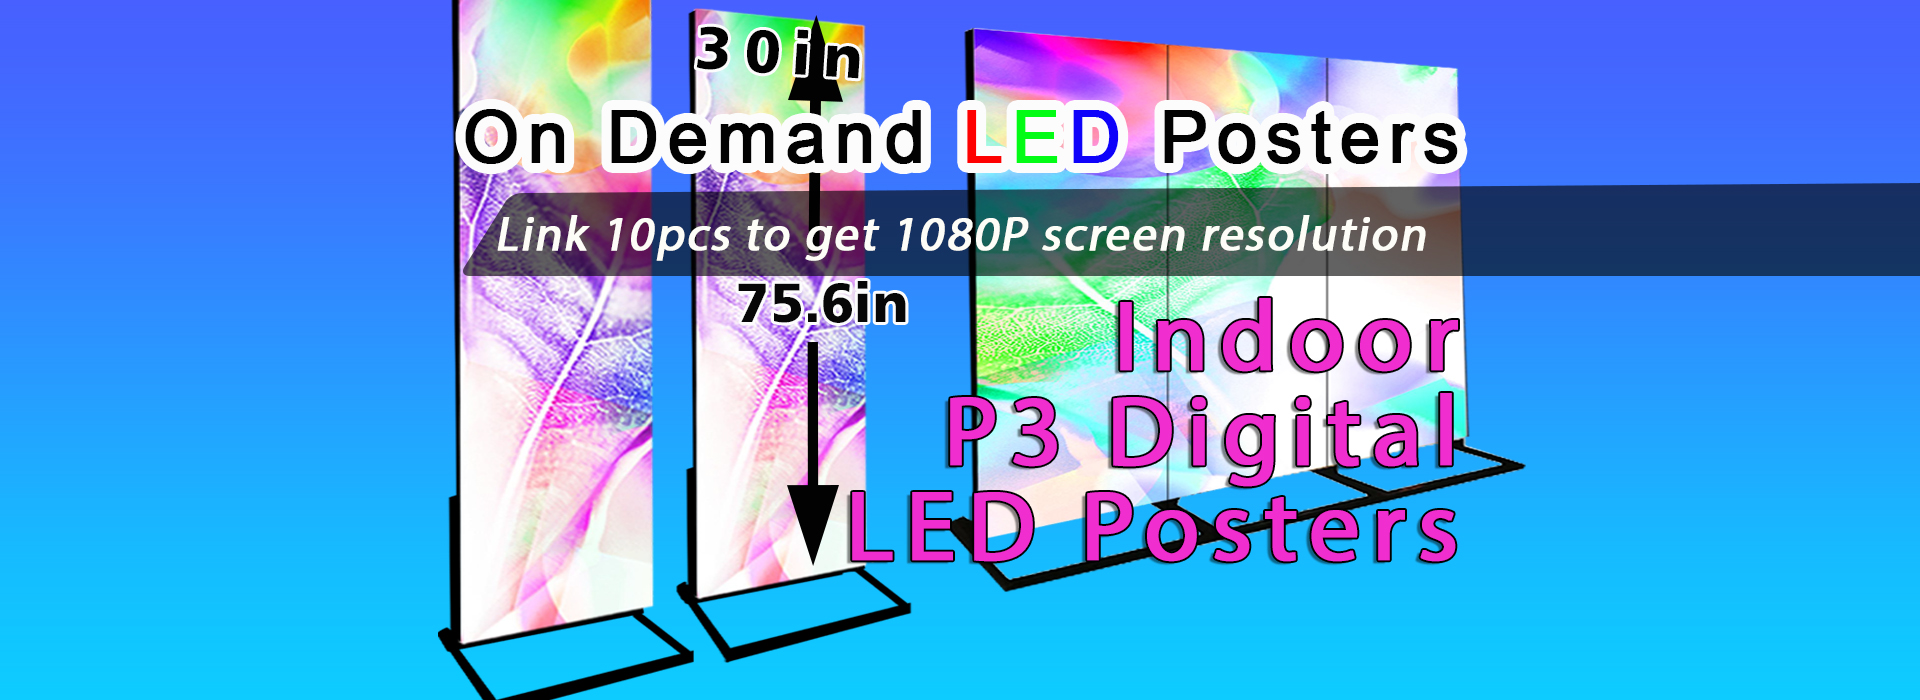 LED Posters